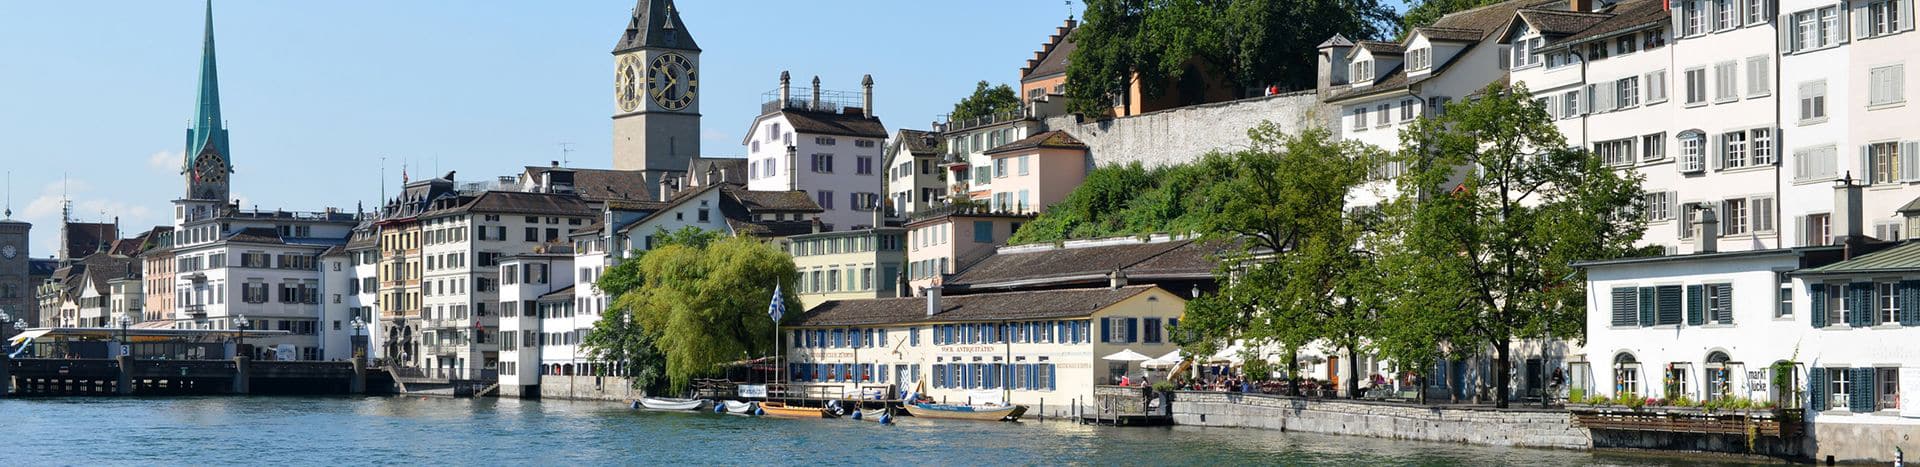 Welcome to Zurich | expats in Switzerland | sgier+partner | swiss immigration+relocation